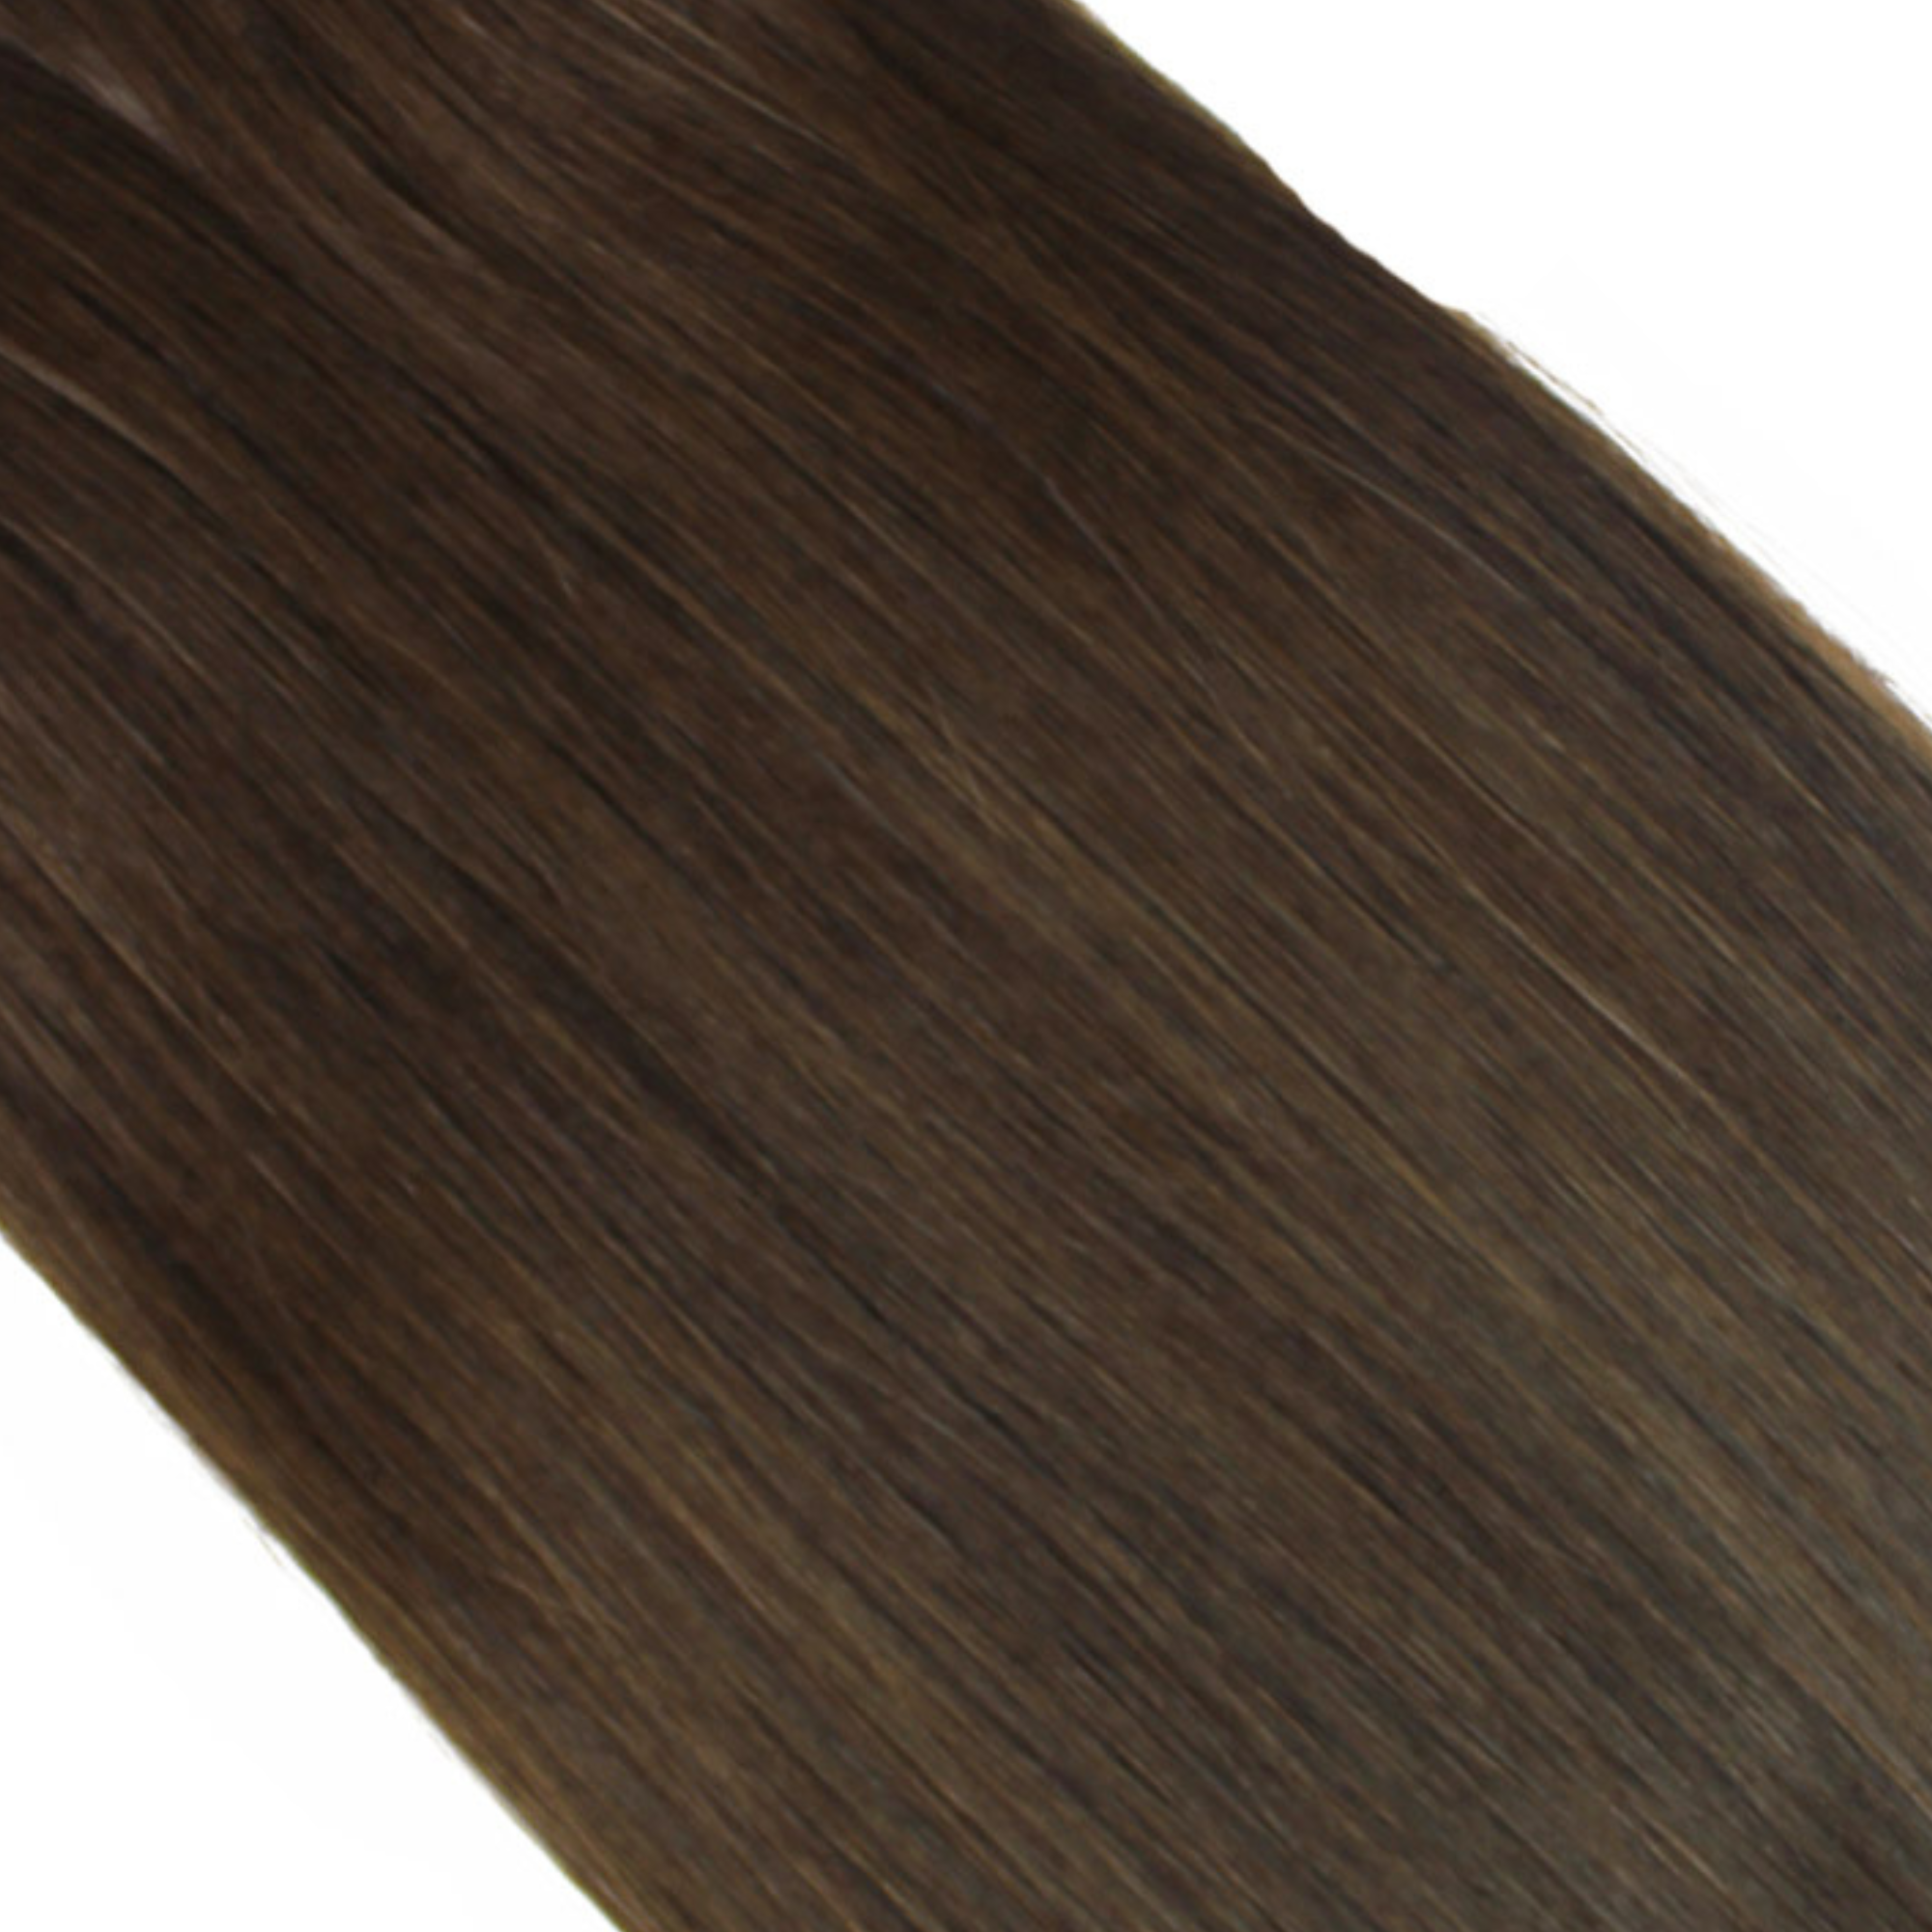 "hair rehab london 22" weft hair extensions shade swatch titled paparazzi perfect"